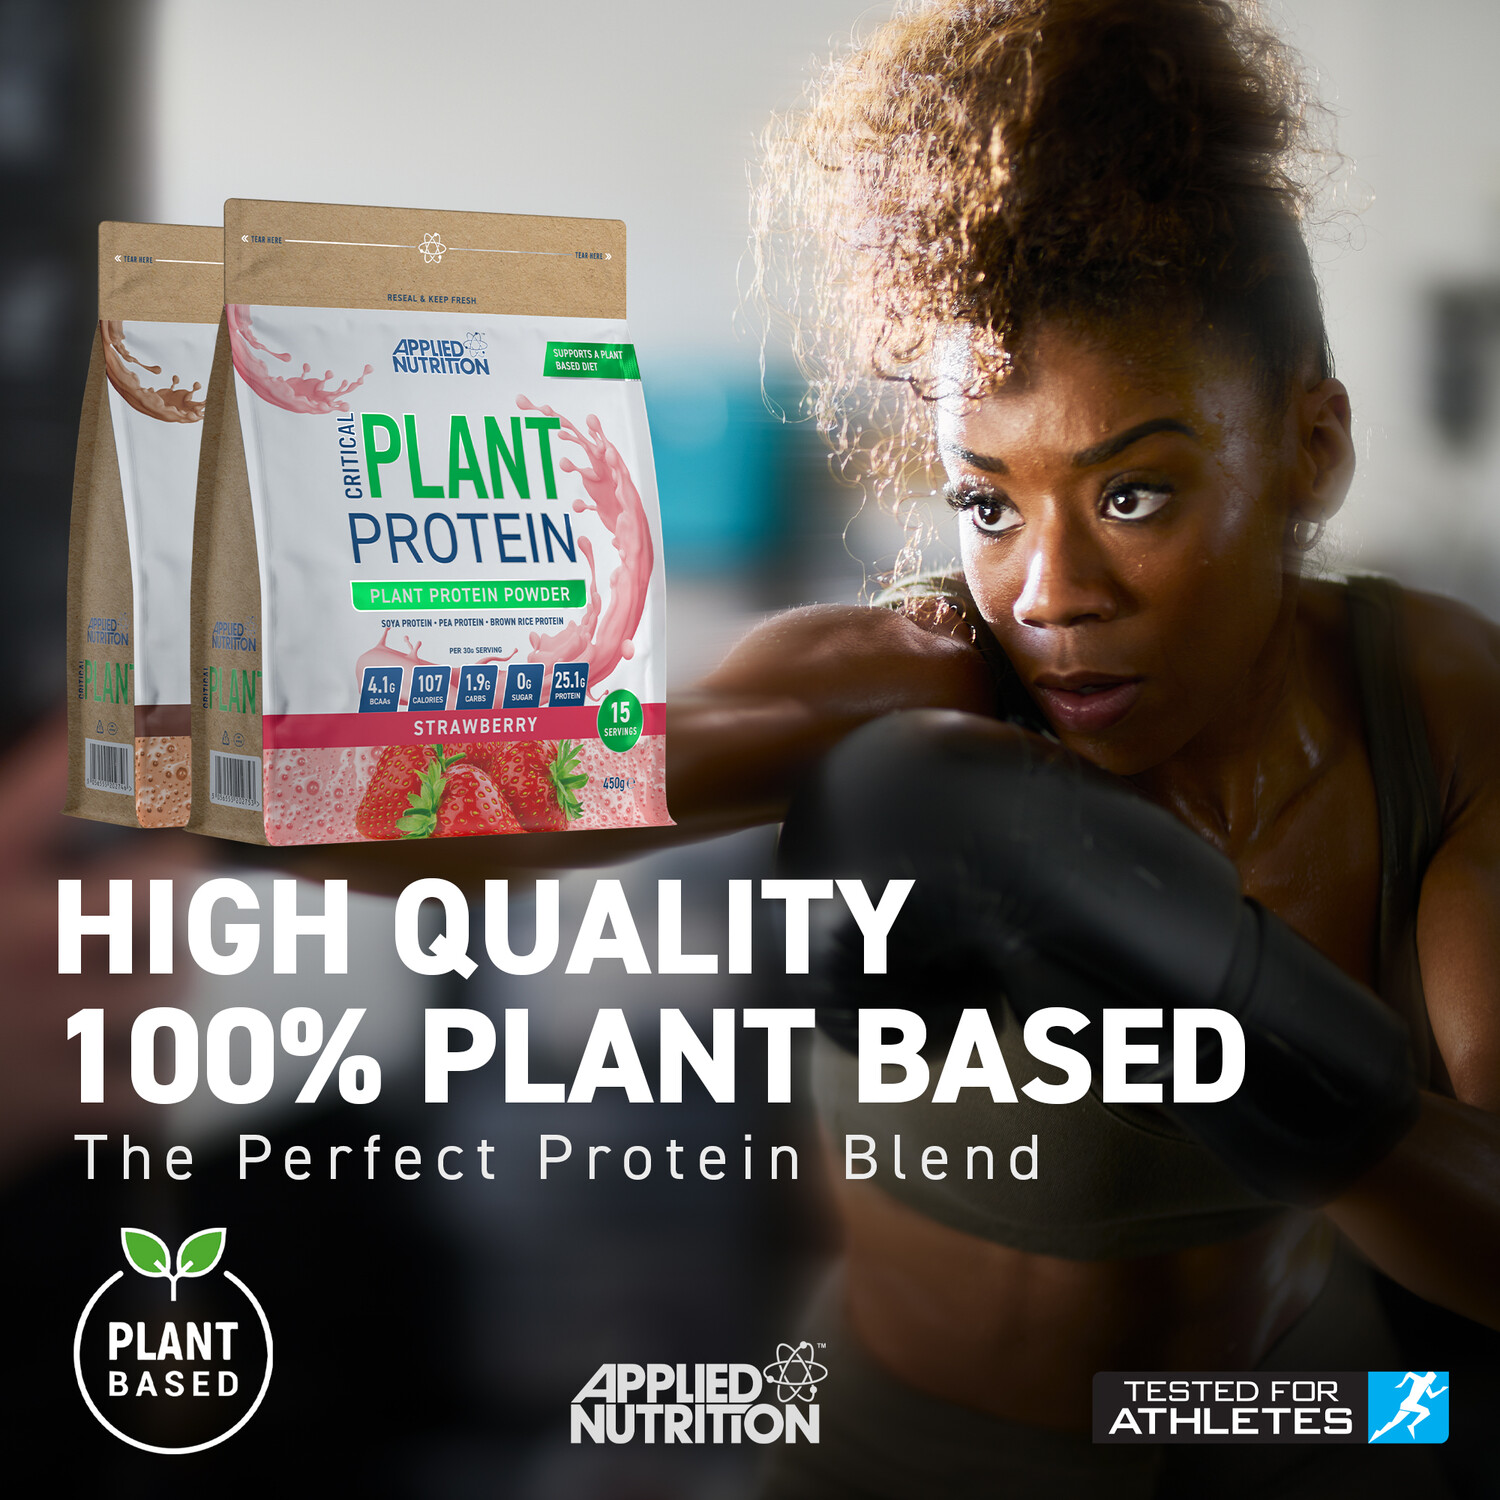 Strawberry Critical Plant Protein Powder - Natural Image 3